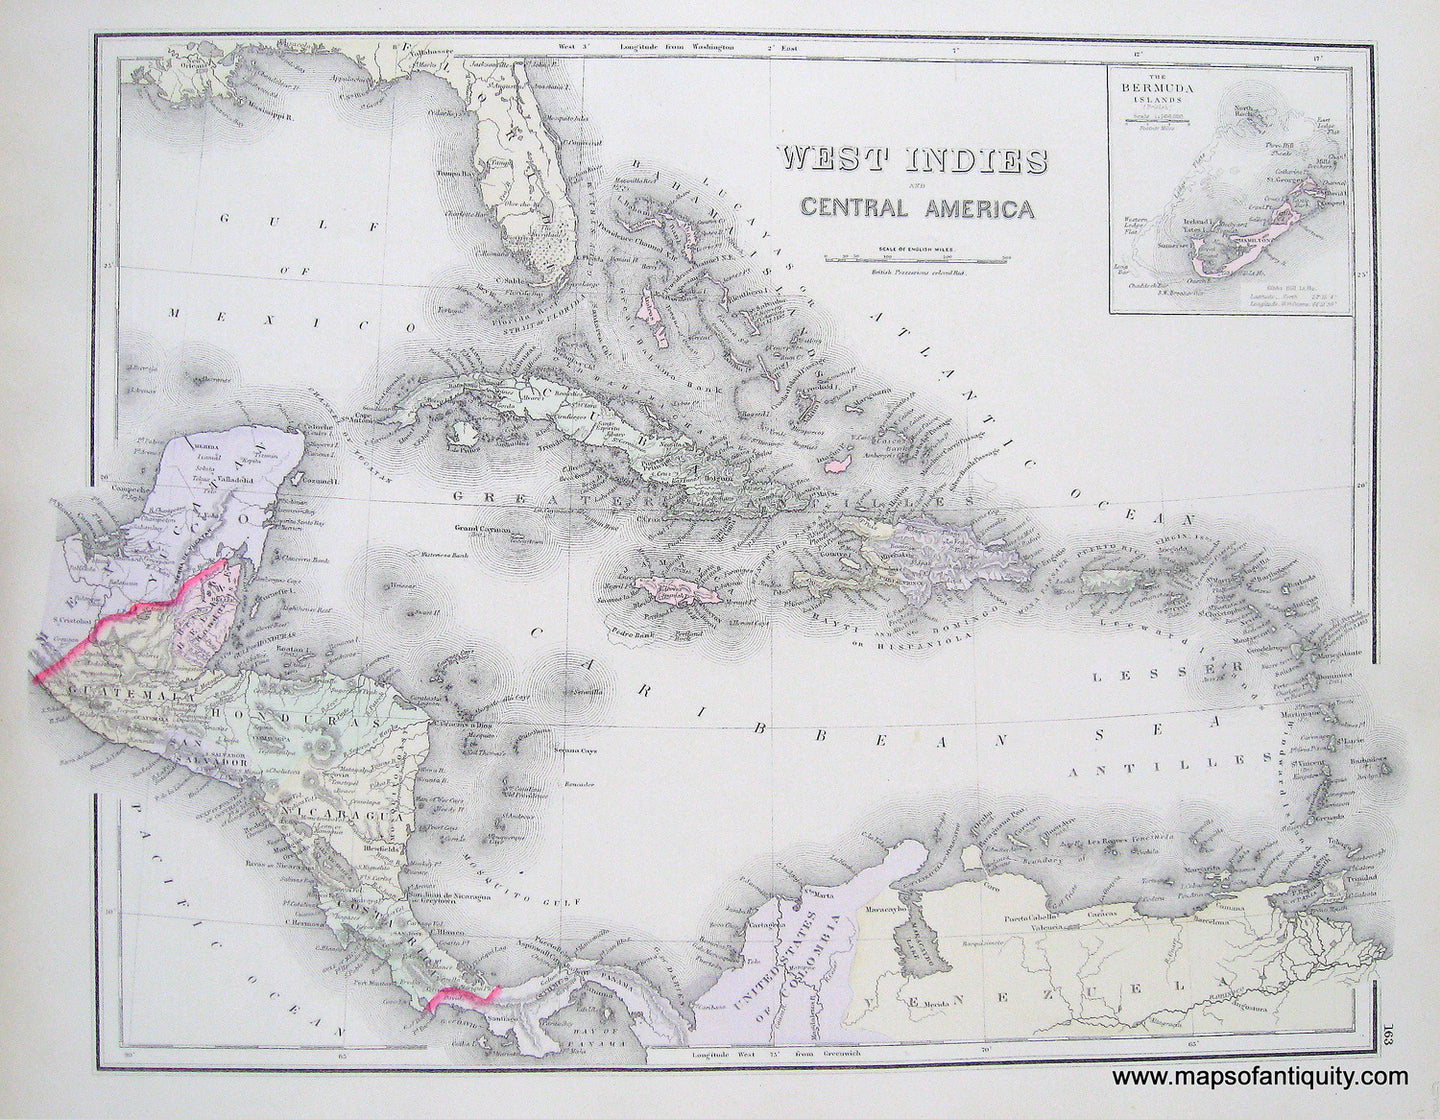 Antique-Hand-Colored-Map-West-Indies-and-Central-America-**********-Central-America-Caribbean-1884-Gray-Maps-Of-Antiquity